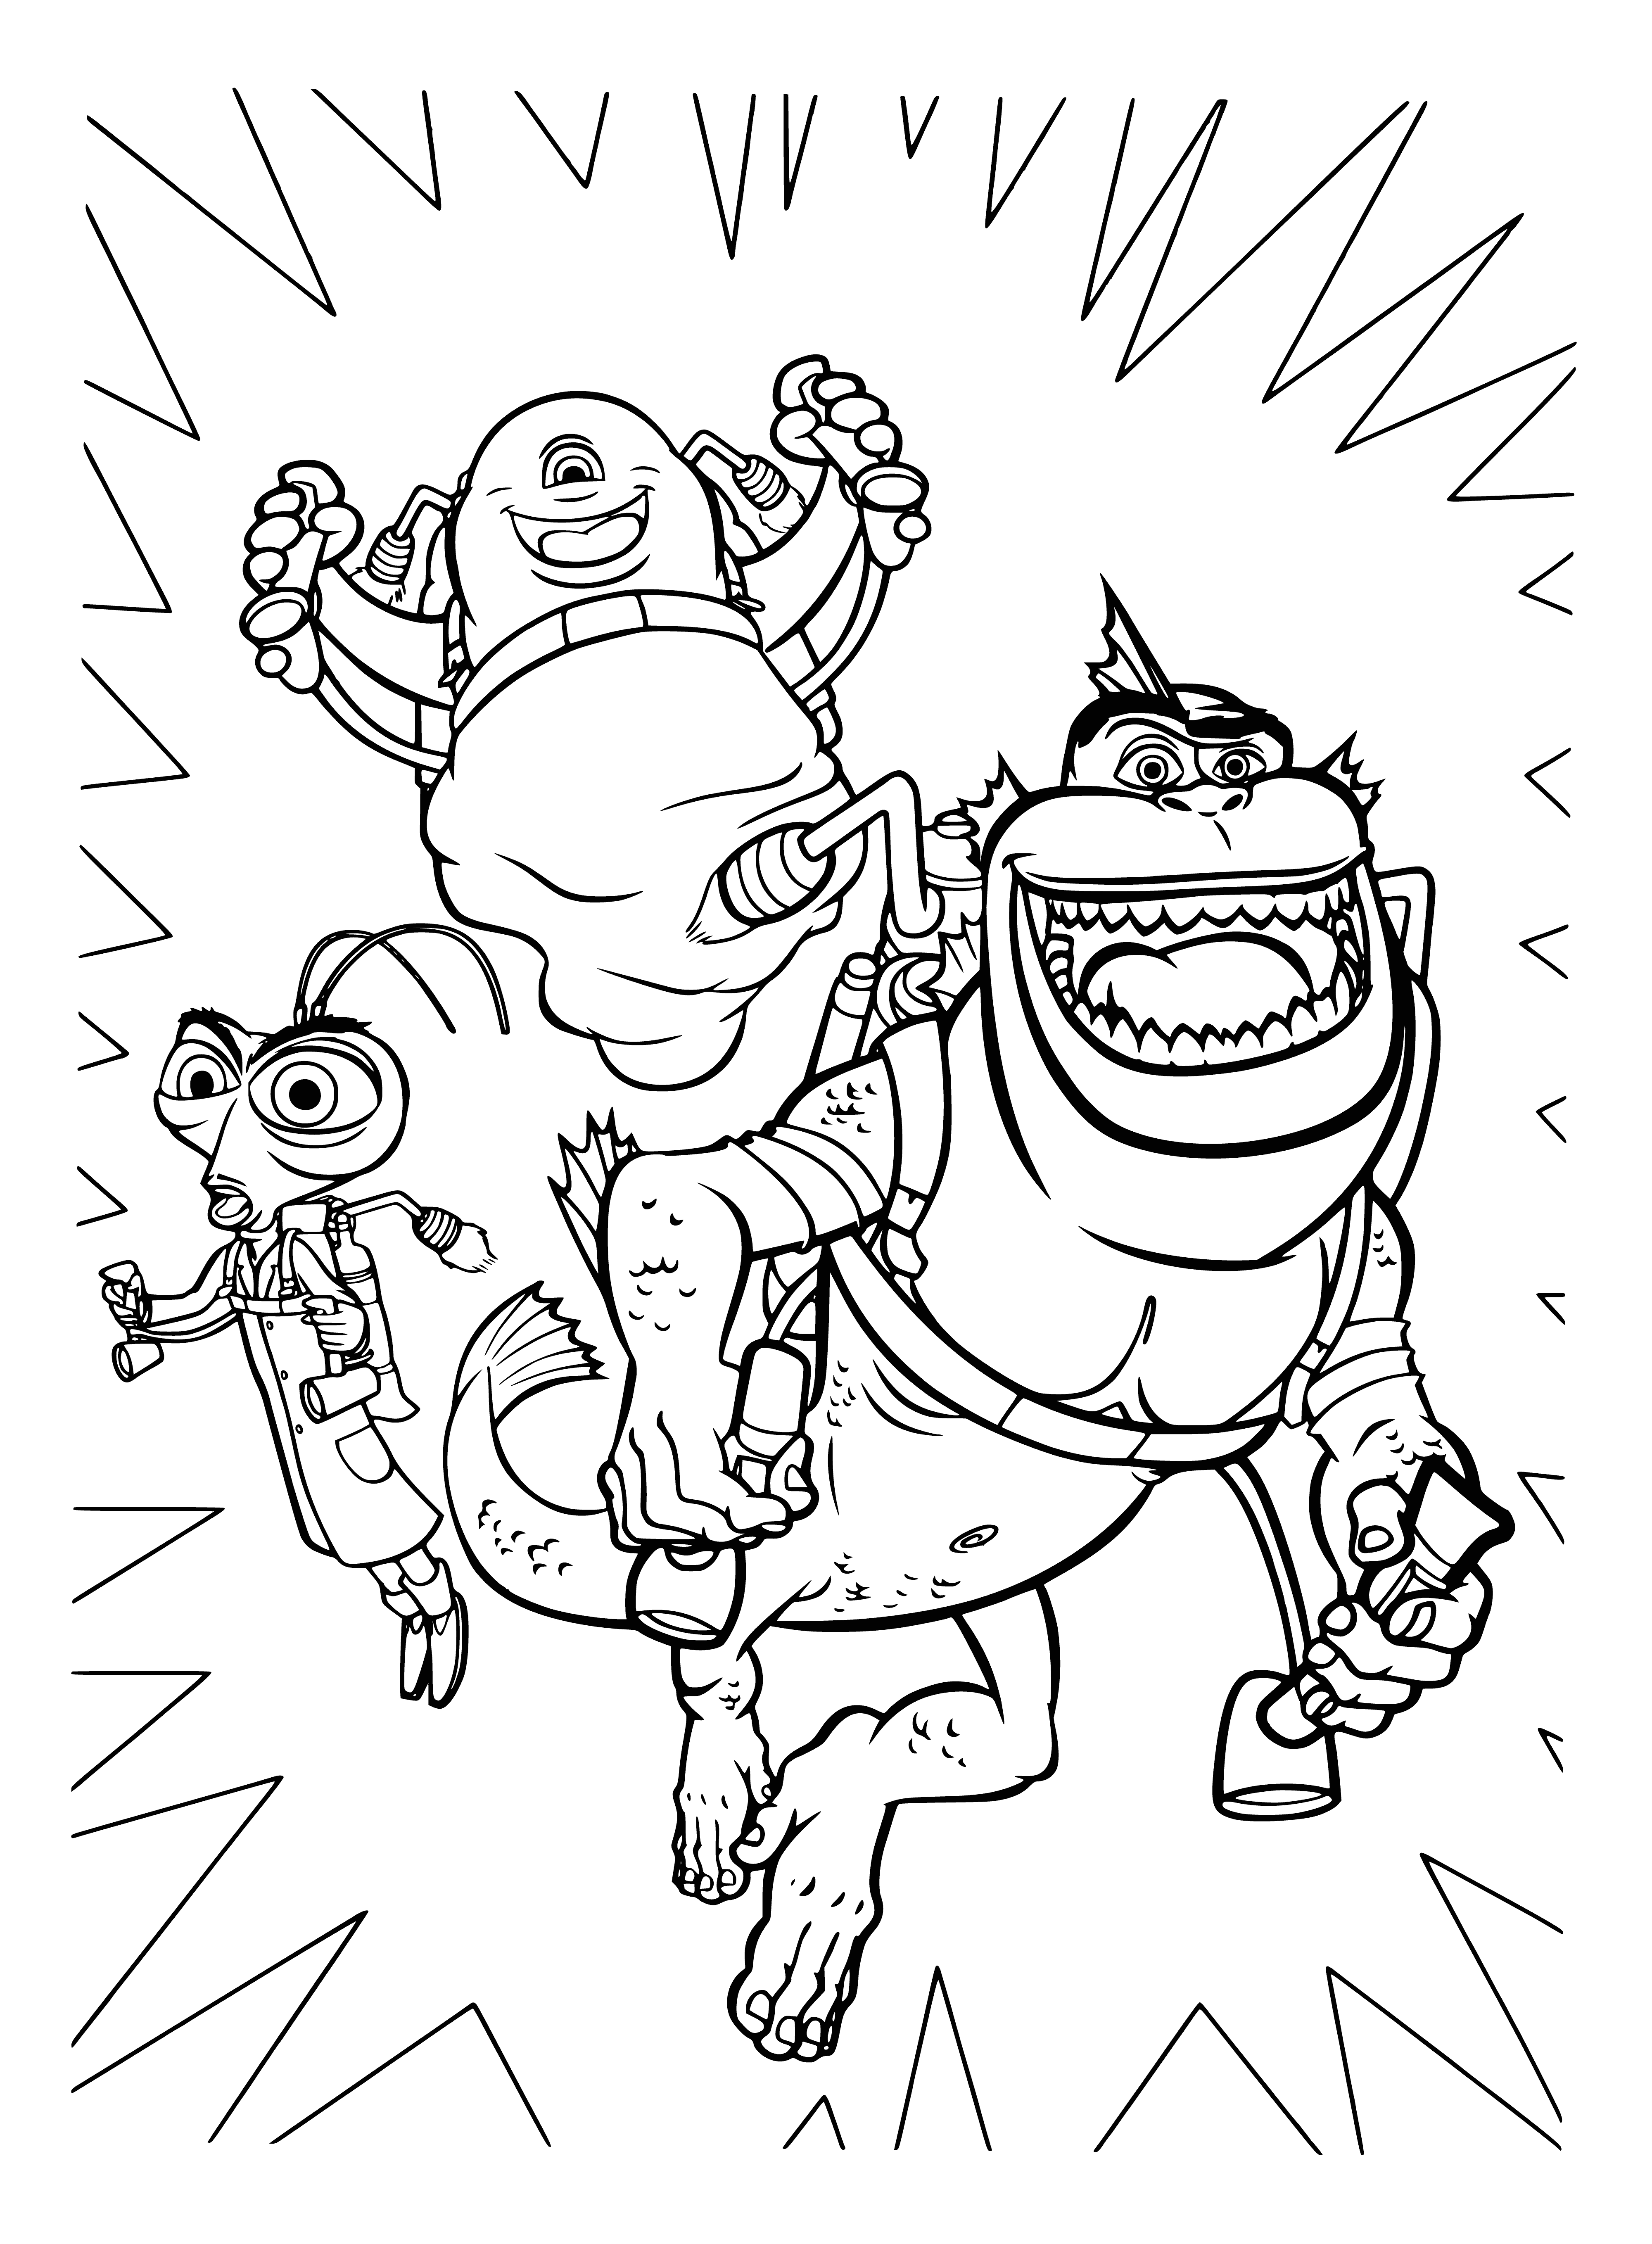 coloring page: The monsters have rockets on their backs in orange, green, and purple with intricate designs. They look unhappy.